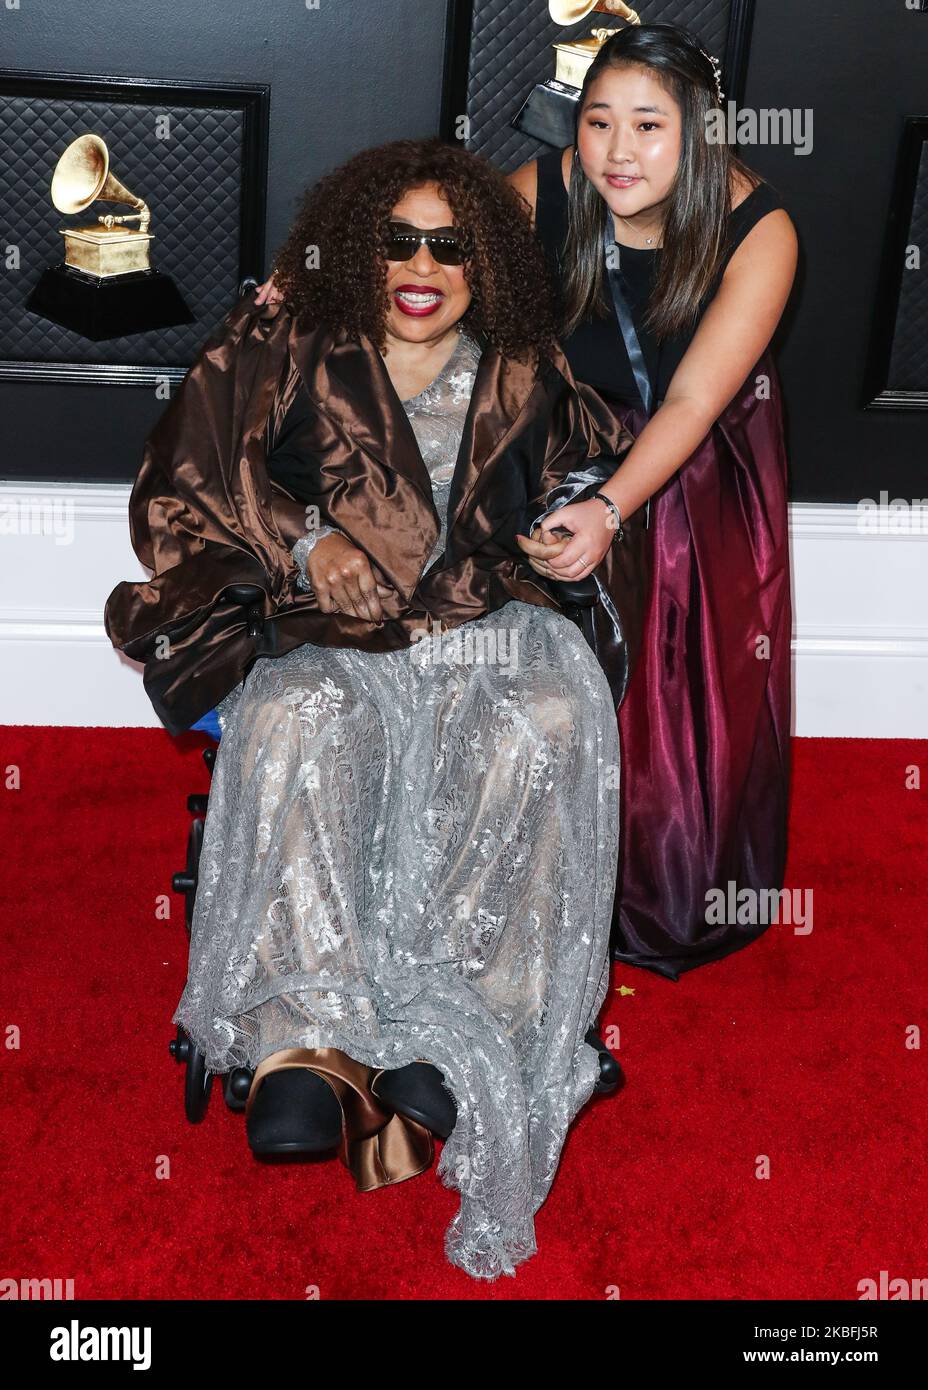 LOS ANGELES, CALIFORNIA, USA - JANUARY 26: Roberta Flack and Kira Koga arrive at the 62nd Annual GRAMMY Awards held at Staples Center on January 26, 2020 in Los Angeles, California, United States. (Photo by Xavier Collin/Image Press Agency/NurPhoto) Stock Photo